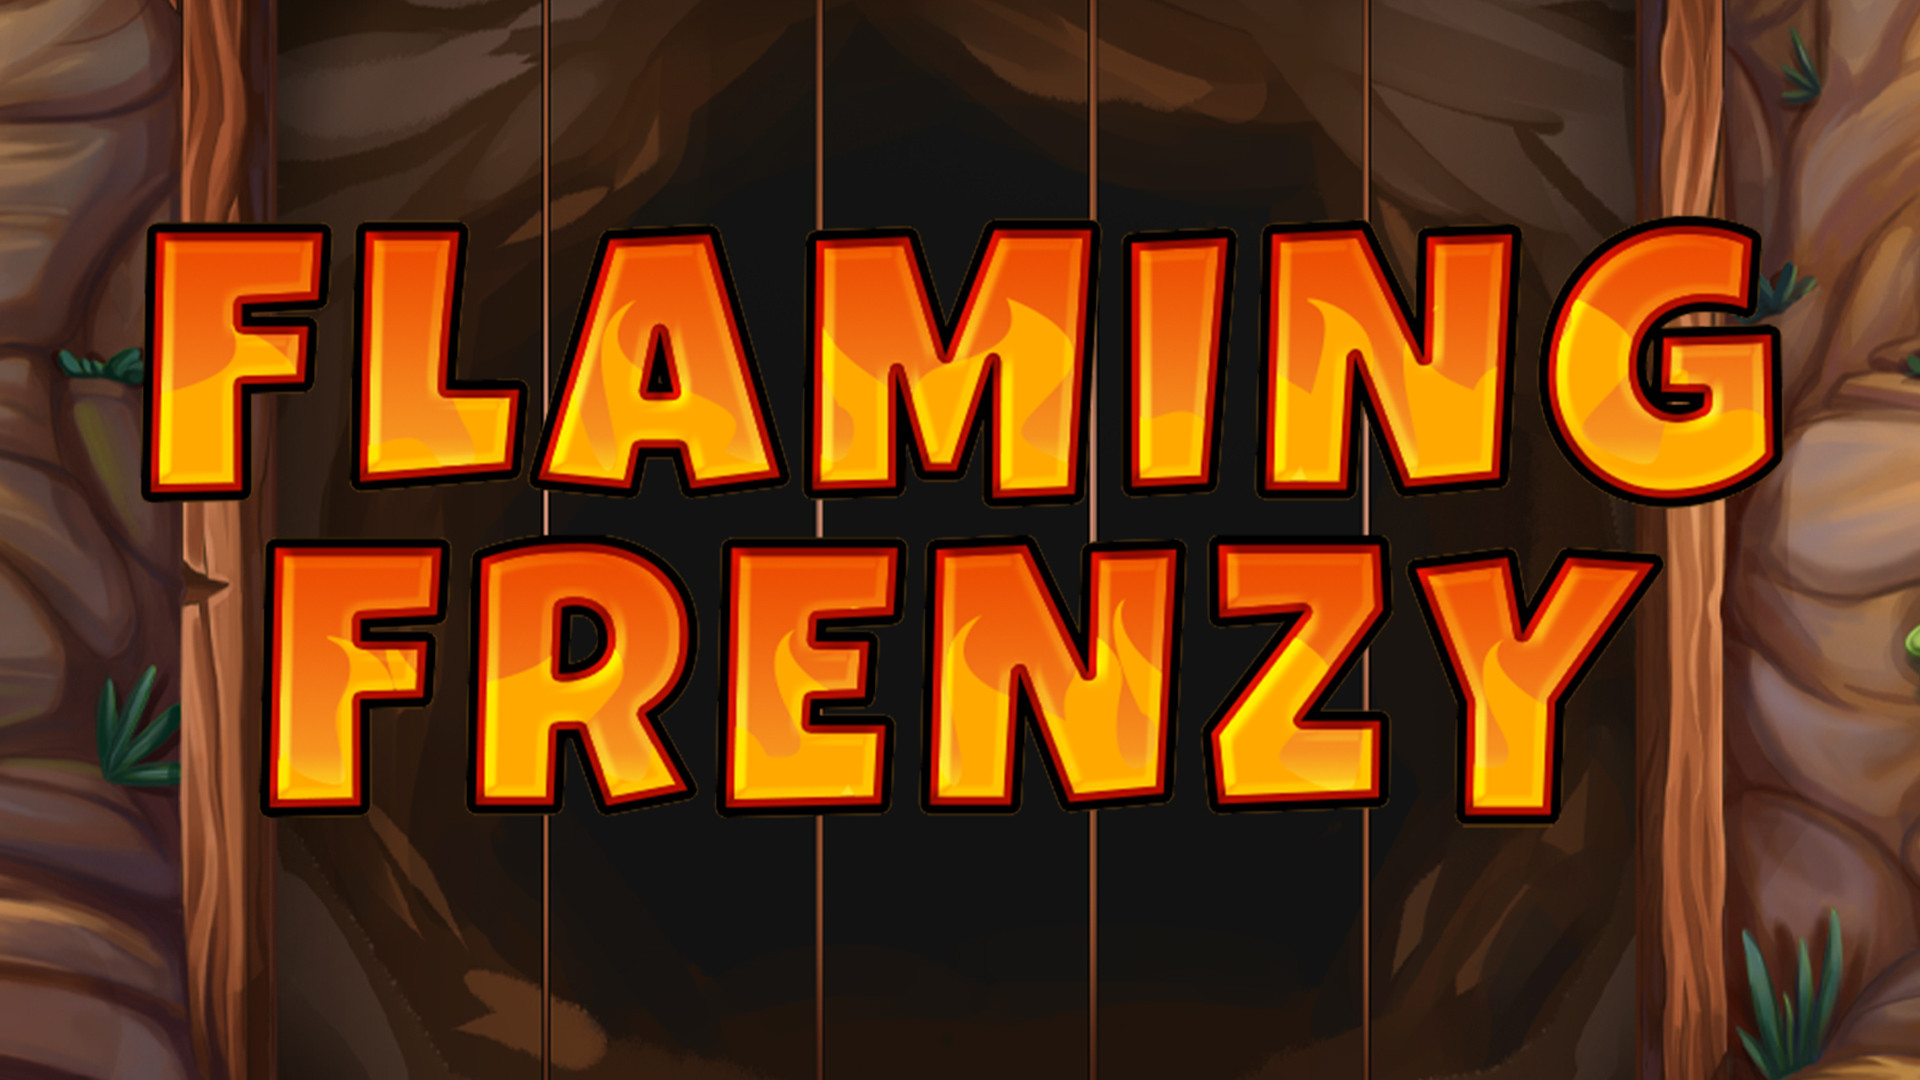 Flaming Frenzy